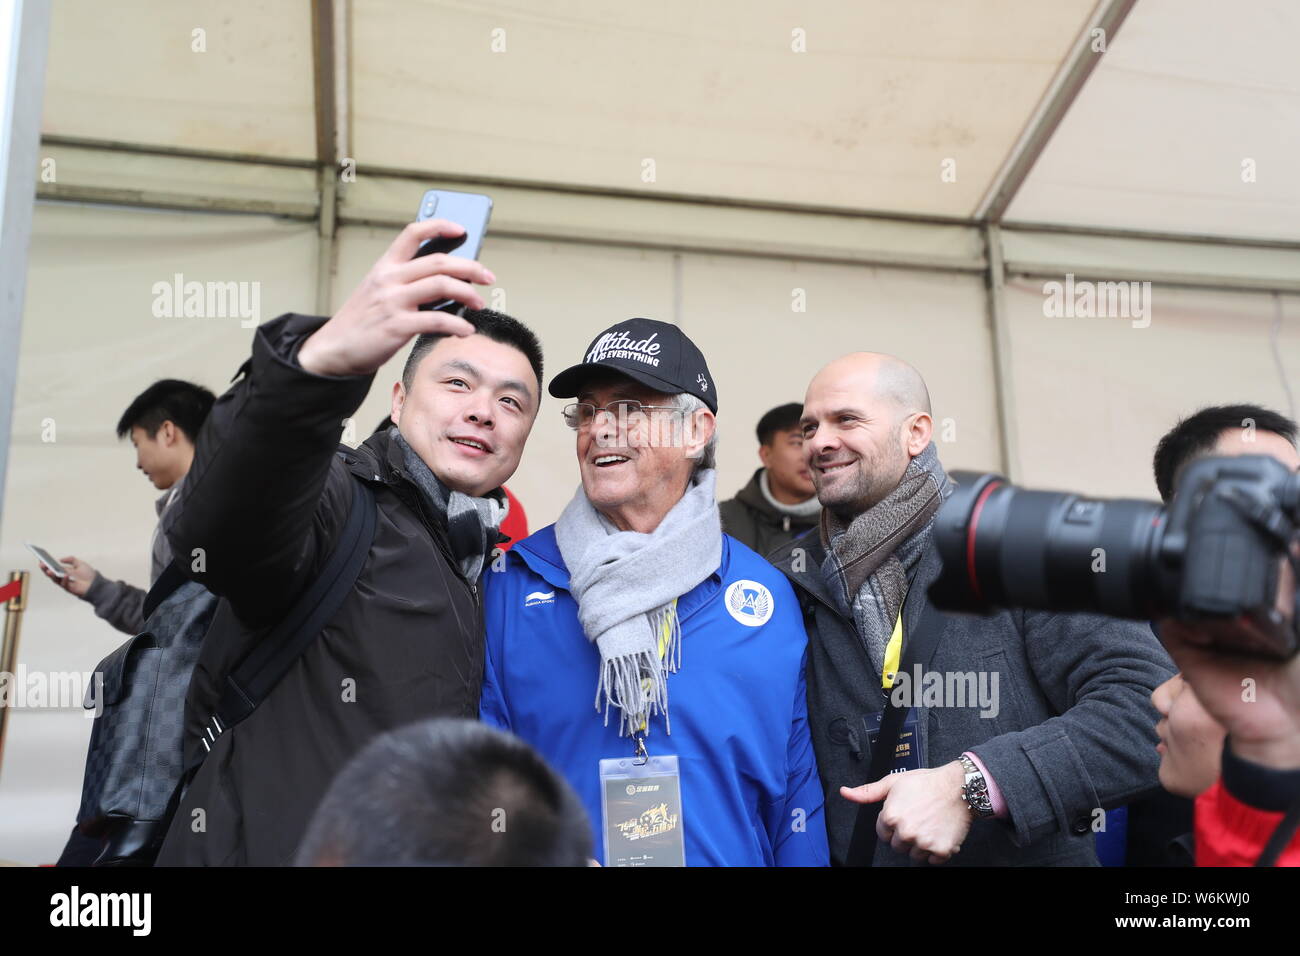 Serbian football coach and former player Bora Milutinovic, center, poses with fans for photos at a press conference of Sina 5v5 Football Golden League Stock Photo